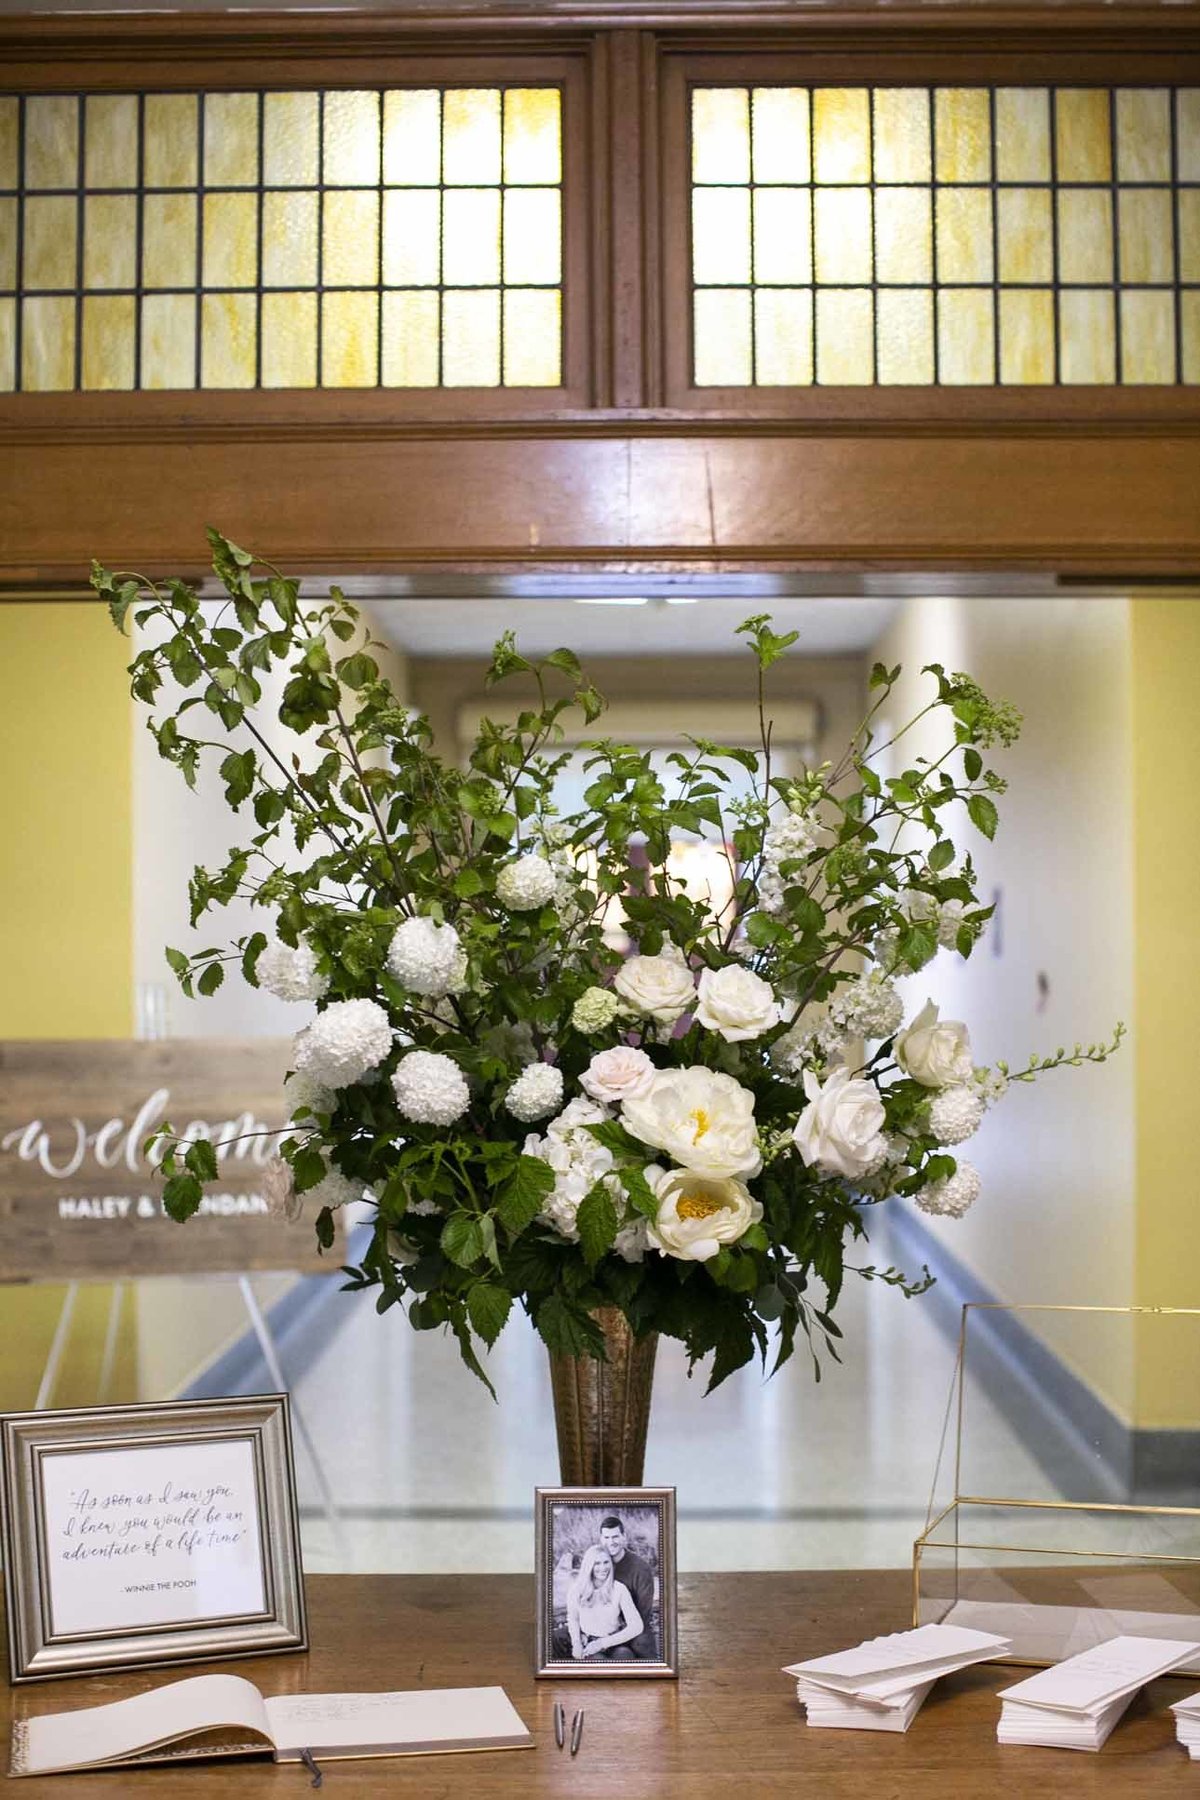 large arrangement of white flowers and tall greenery in gold urn for welcome table